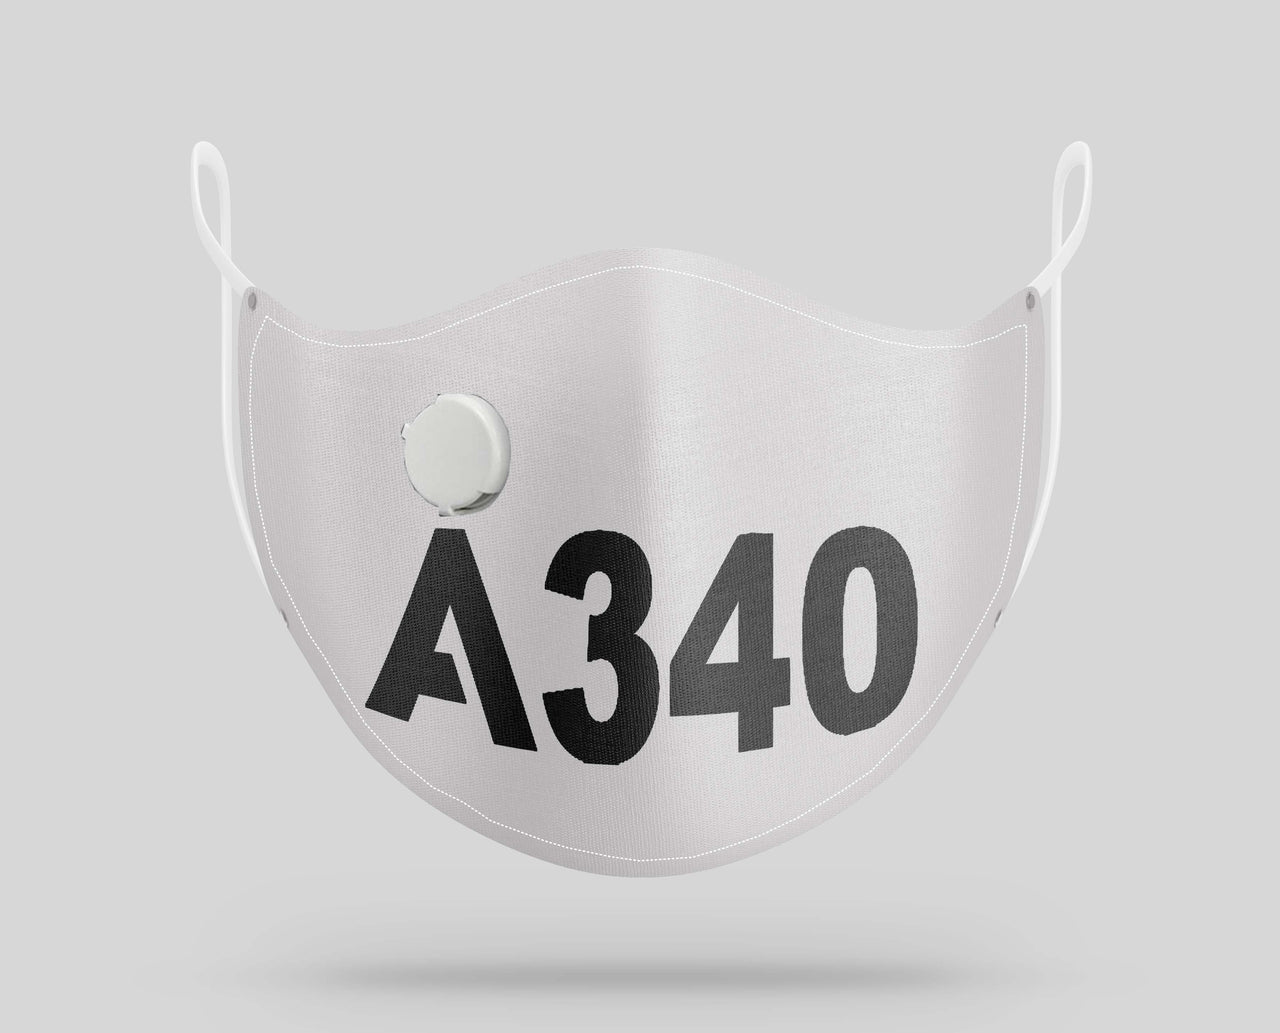 Airbus A340 Text Designed Face Masks